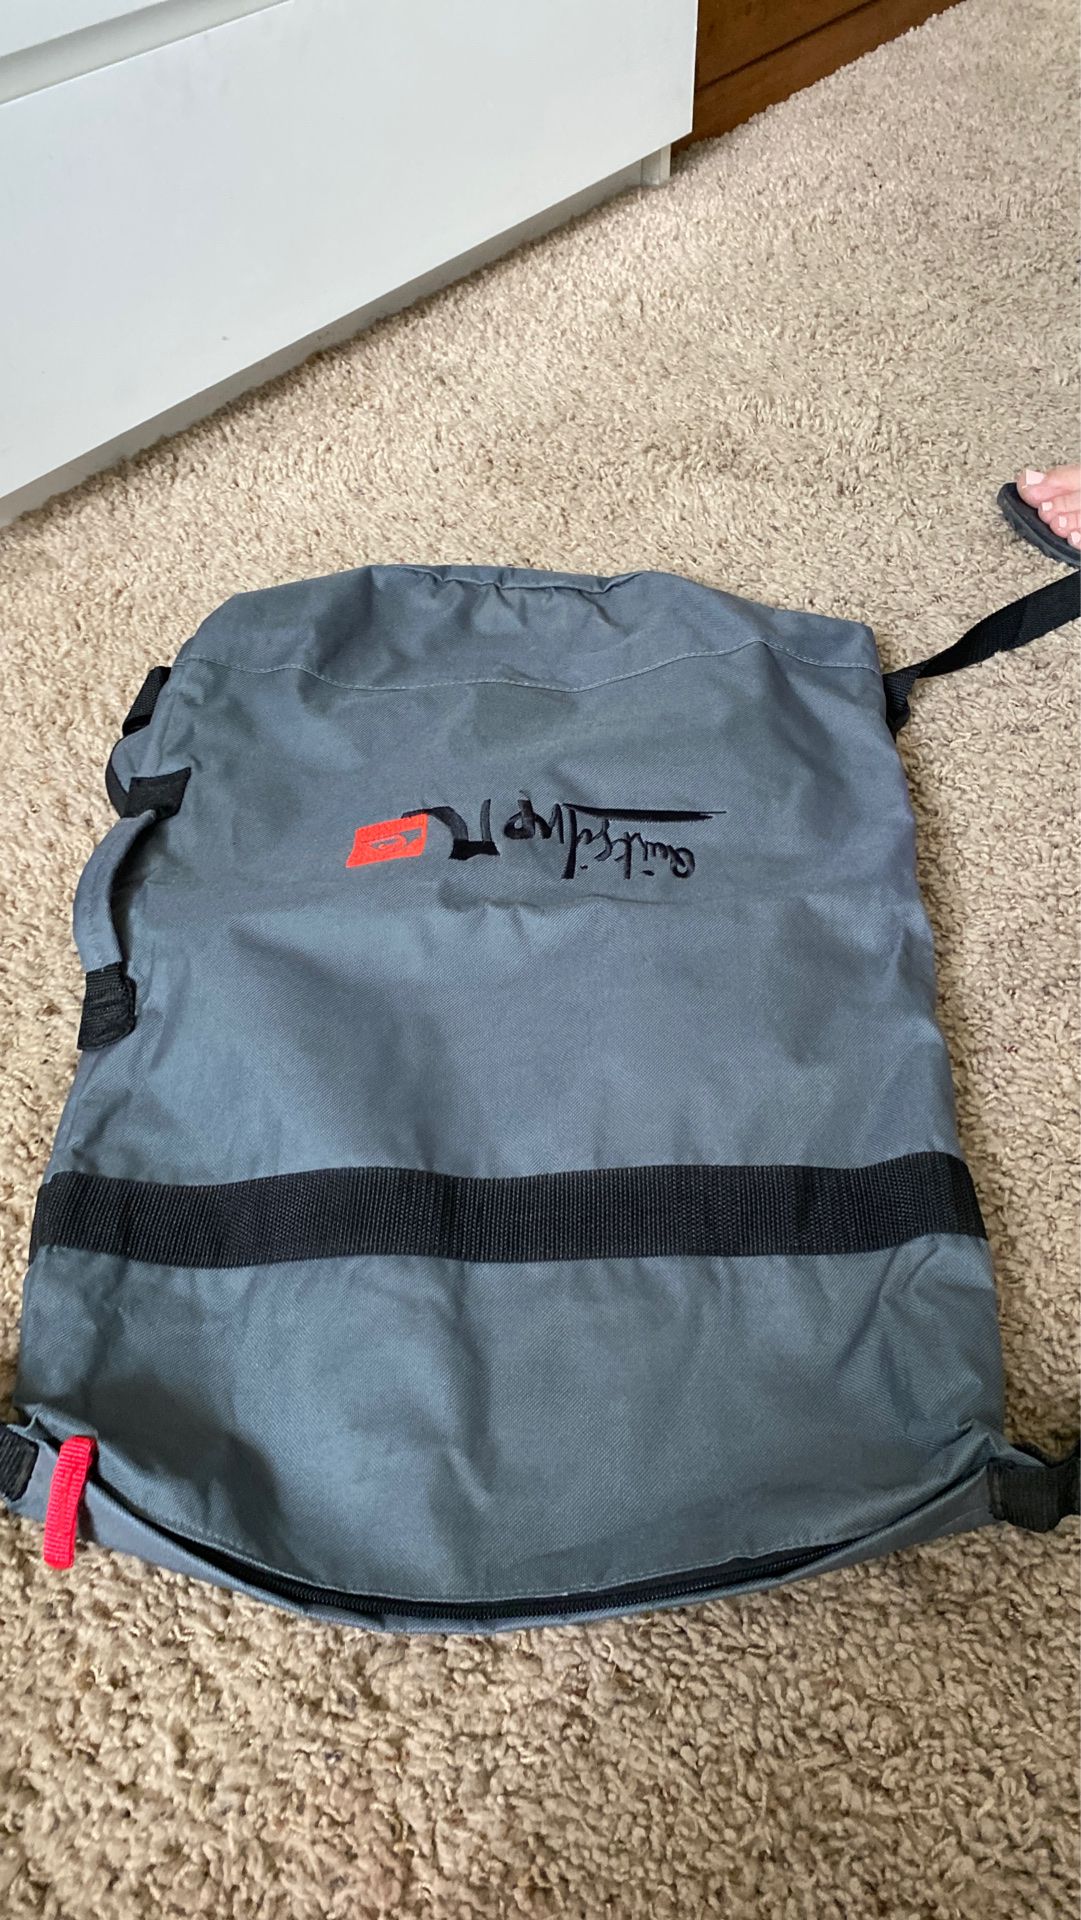 Quicksilver backpack